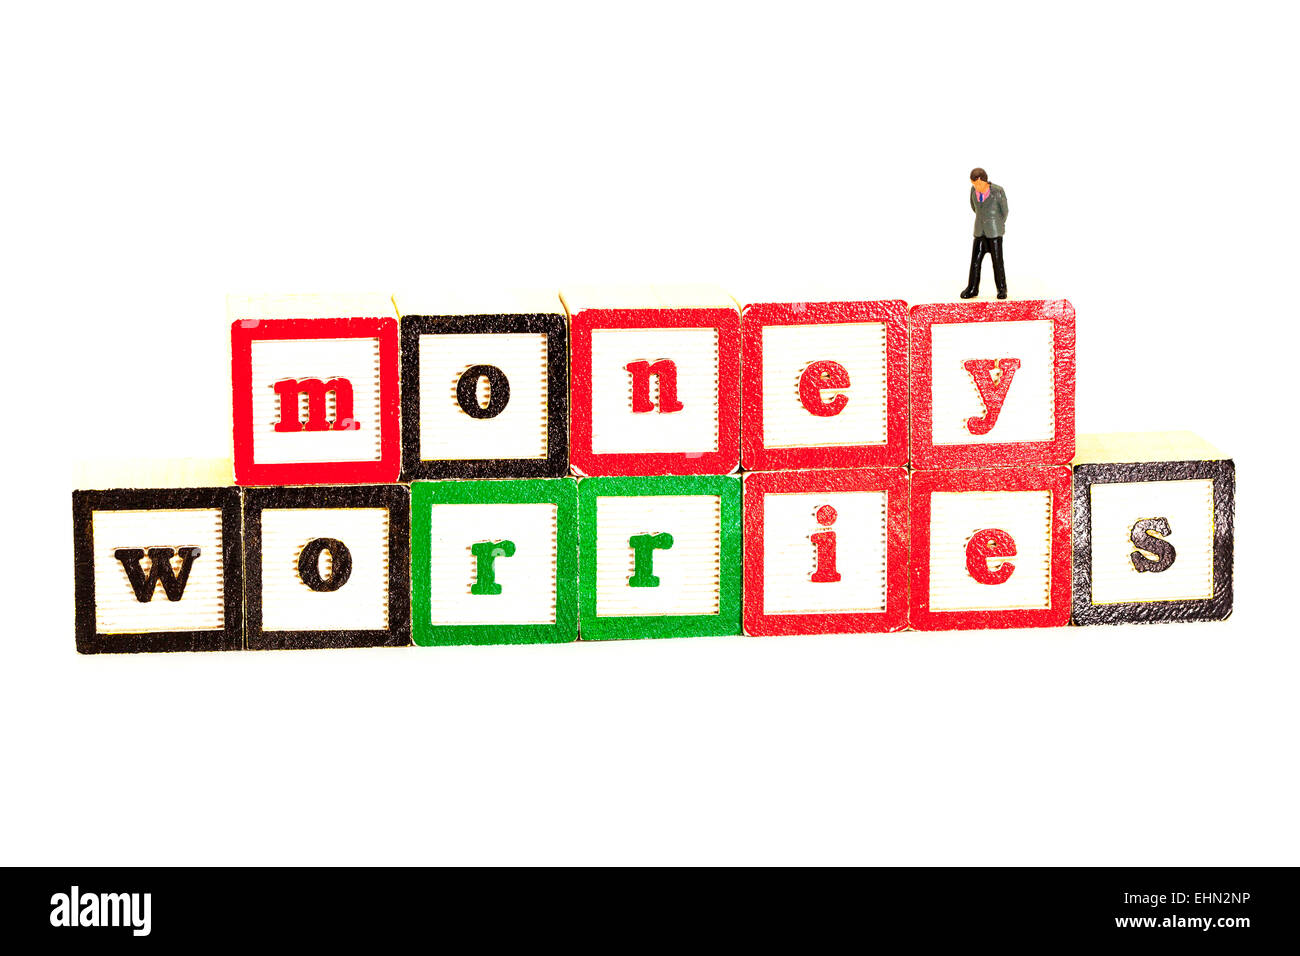 money worries worry about debt debts bankruptcy words isolated cut out cutout white background woes bankrupt loans loan Stock Photo